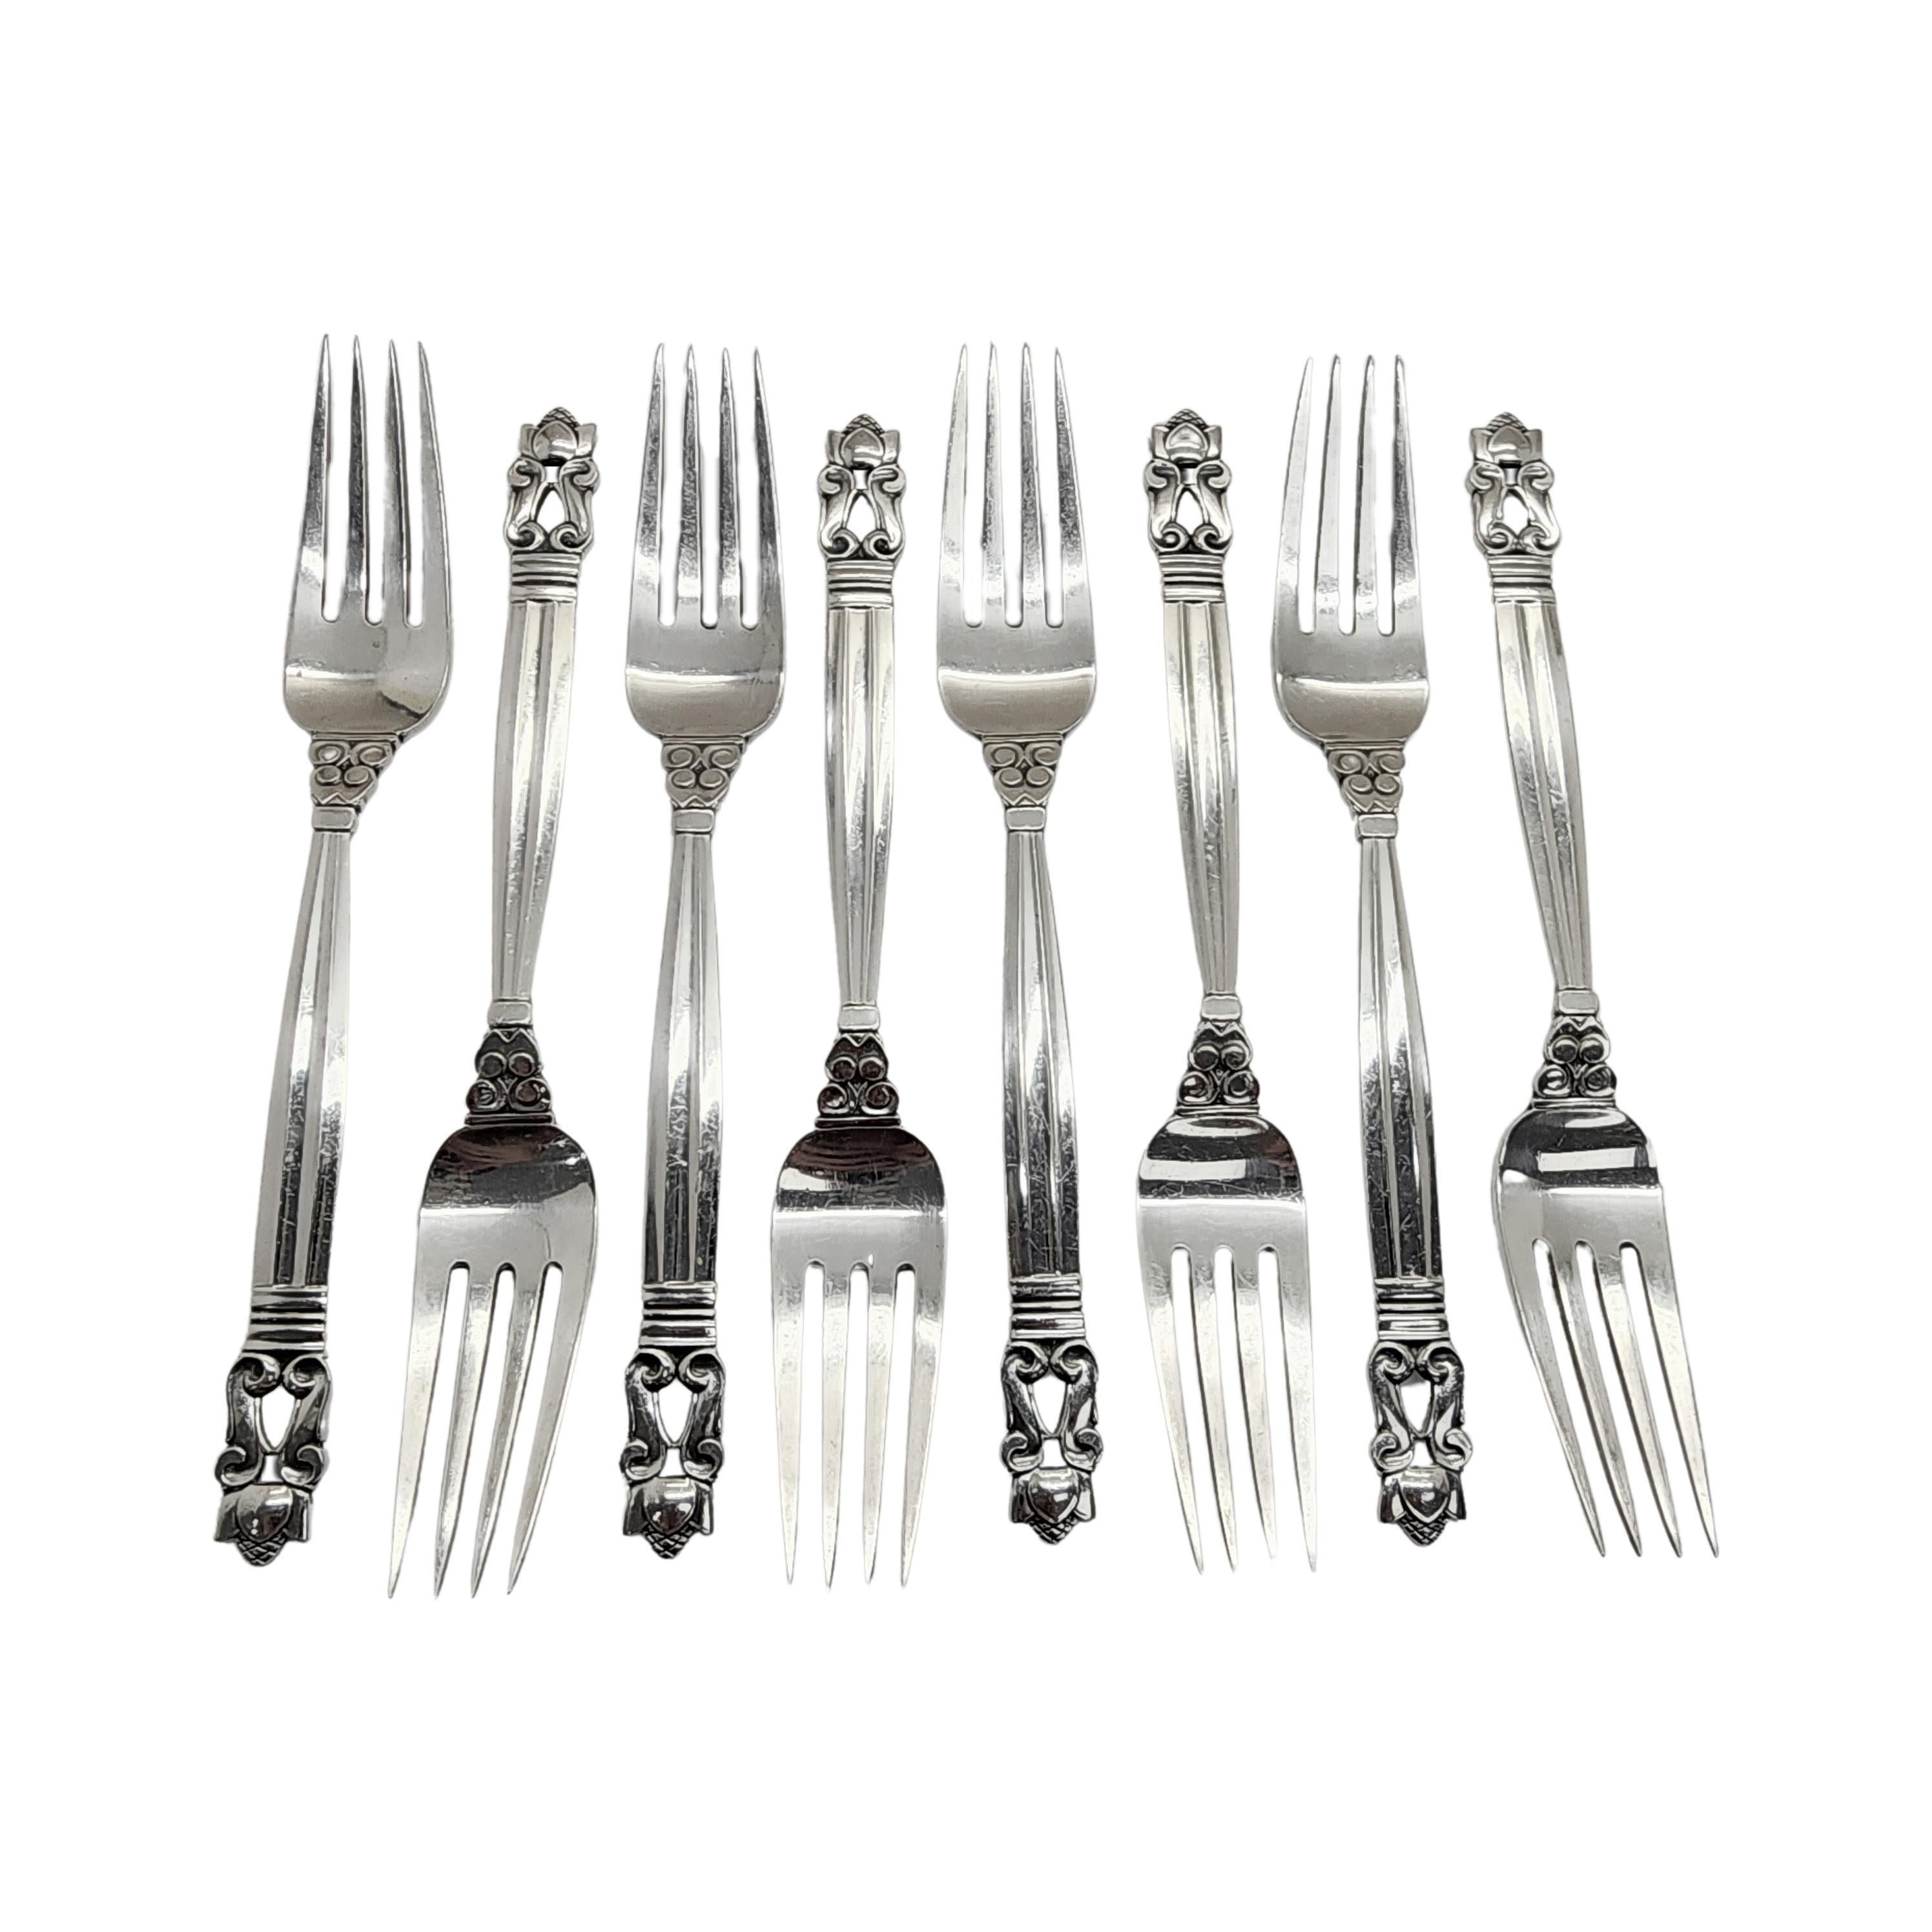 Set of 8 sterling silver forks in the Acorn pattern by Georg Jensen.

The Acorn pattern was introduced in 1915 as a collaboration between Georg Jensen and designer Johan Ronde. The Acorn pattern, which combines Art Nouveau and Art Deco styles, has